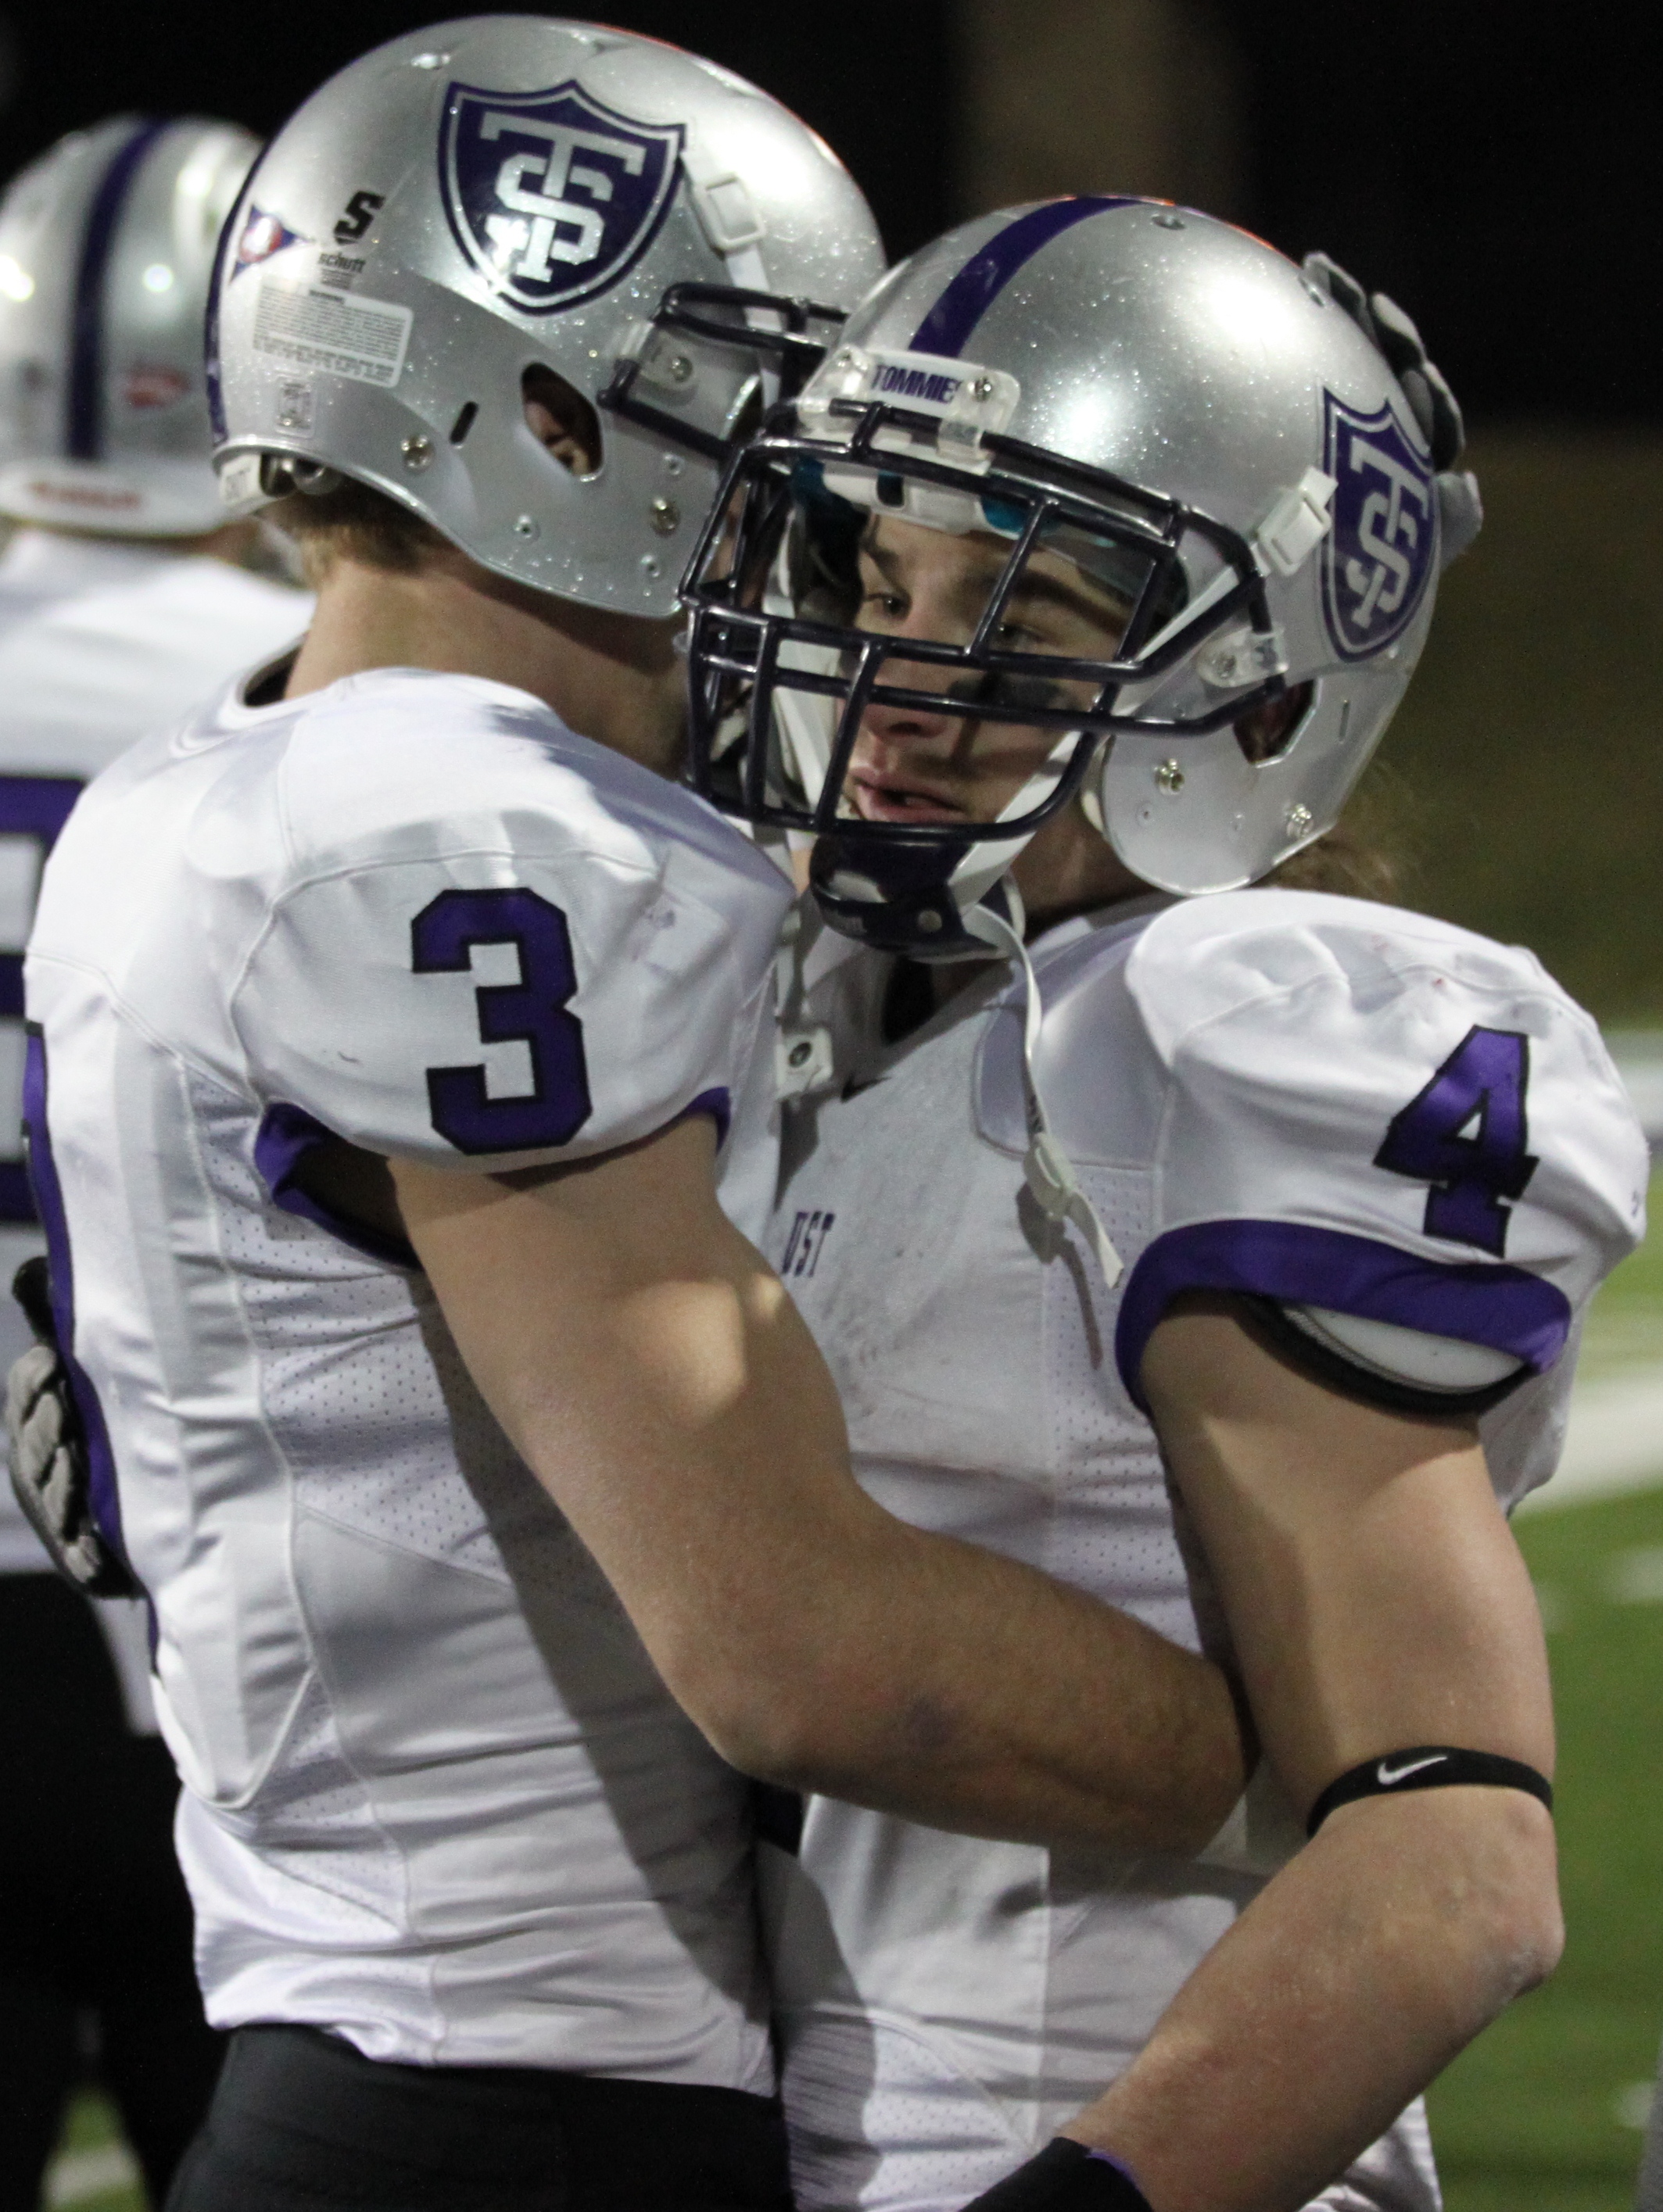 Sophomore wide receiver Dan Noerhing hugs senior wide receiver Fritz Waldvogel after St. Thomas was knocked out of the NCAA semifinals by Whitewater. Waldvogel ended his career as the most prolific receiver in school history. (Ryan Shaver/TommieMedia)